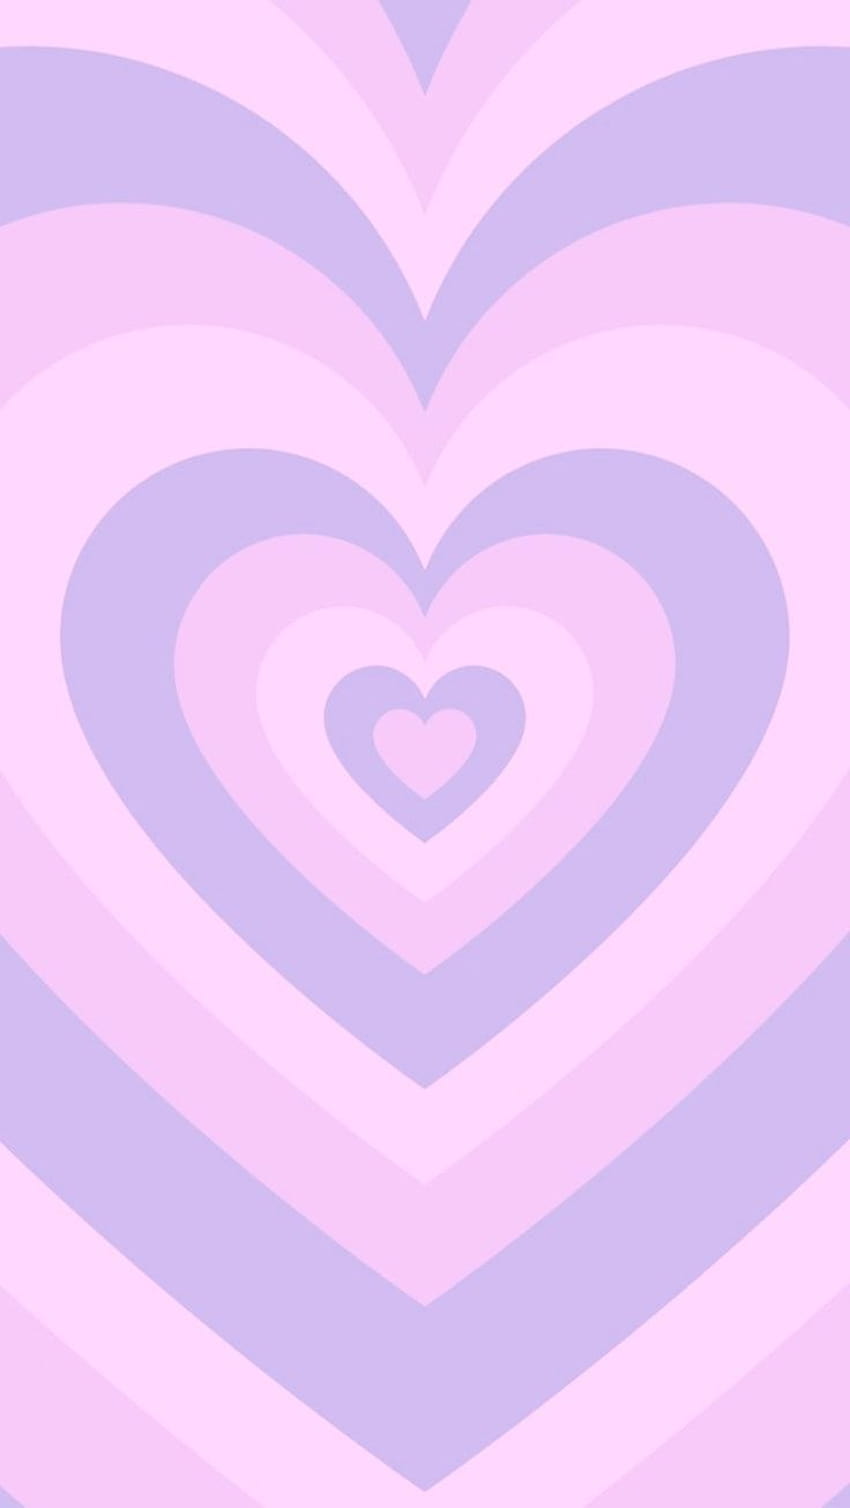 Share more than 57 pink heart aesthetic wallpaper best - in.cdgdbentre